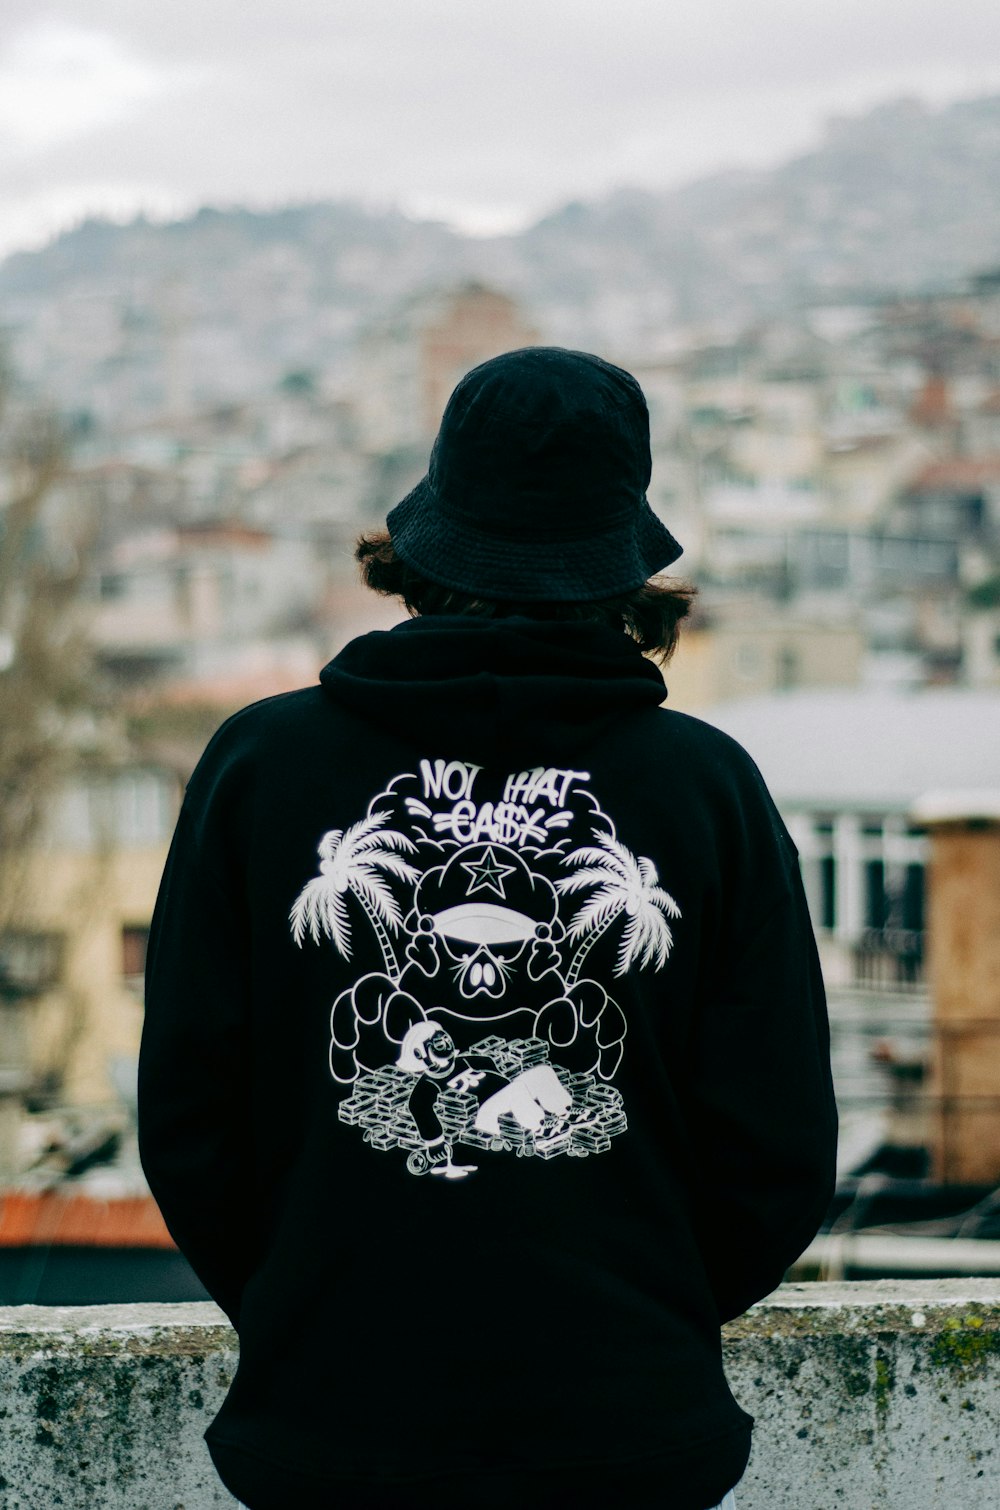 a person wearing a black hoodie with a picture of a gorilla on it